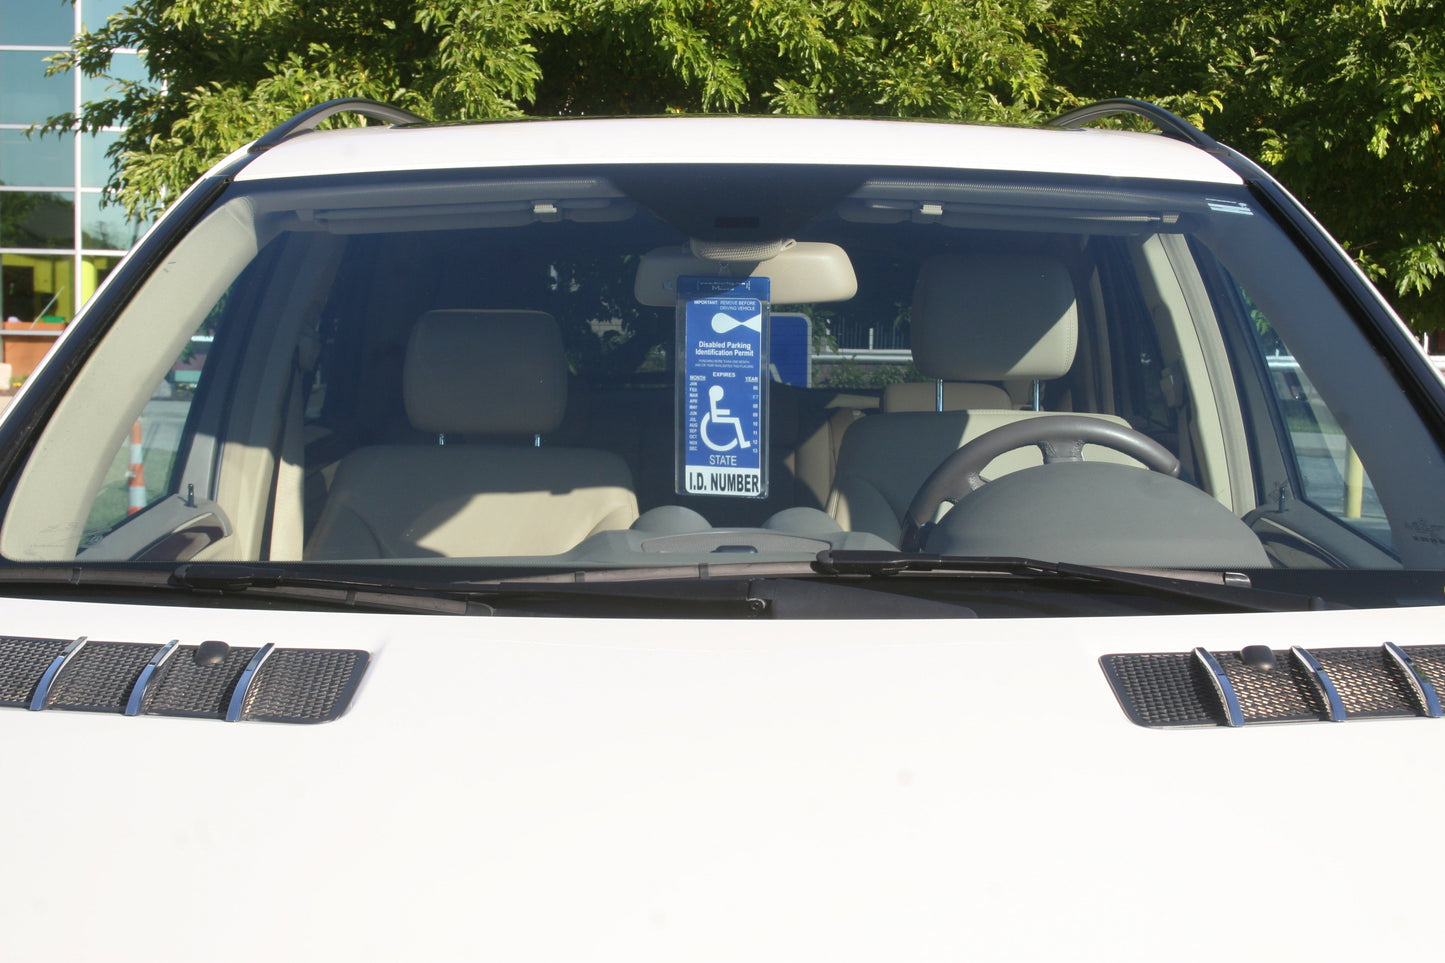 handicap parking permit holder easily displayed and seen. Made in USA